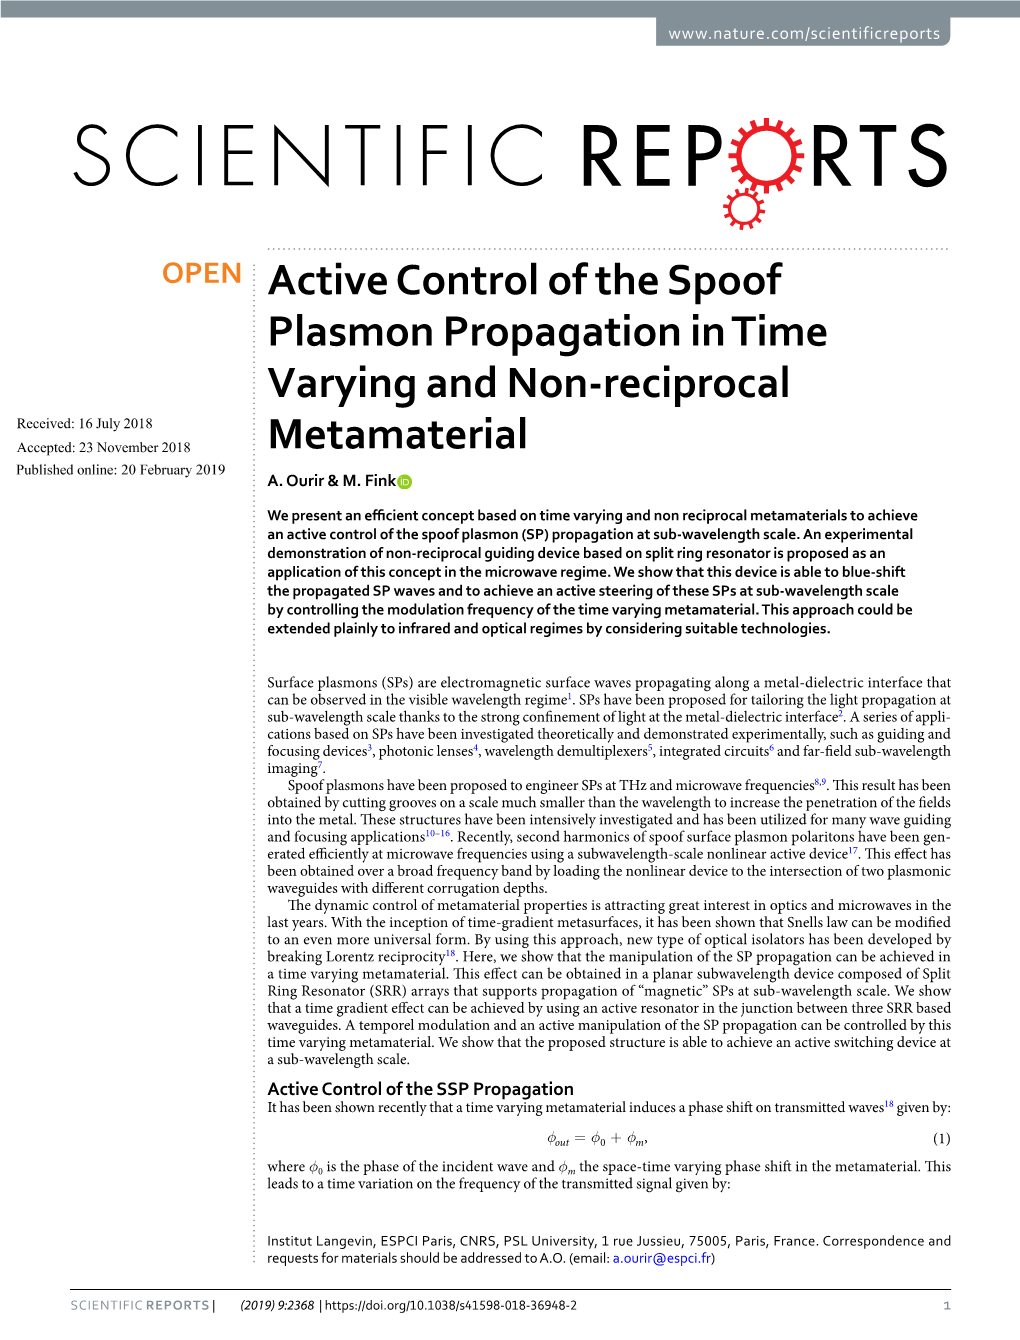 Active Control of the Spoof Plasmon Propagation in Time Varying And